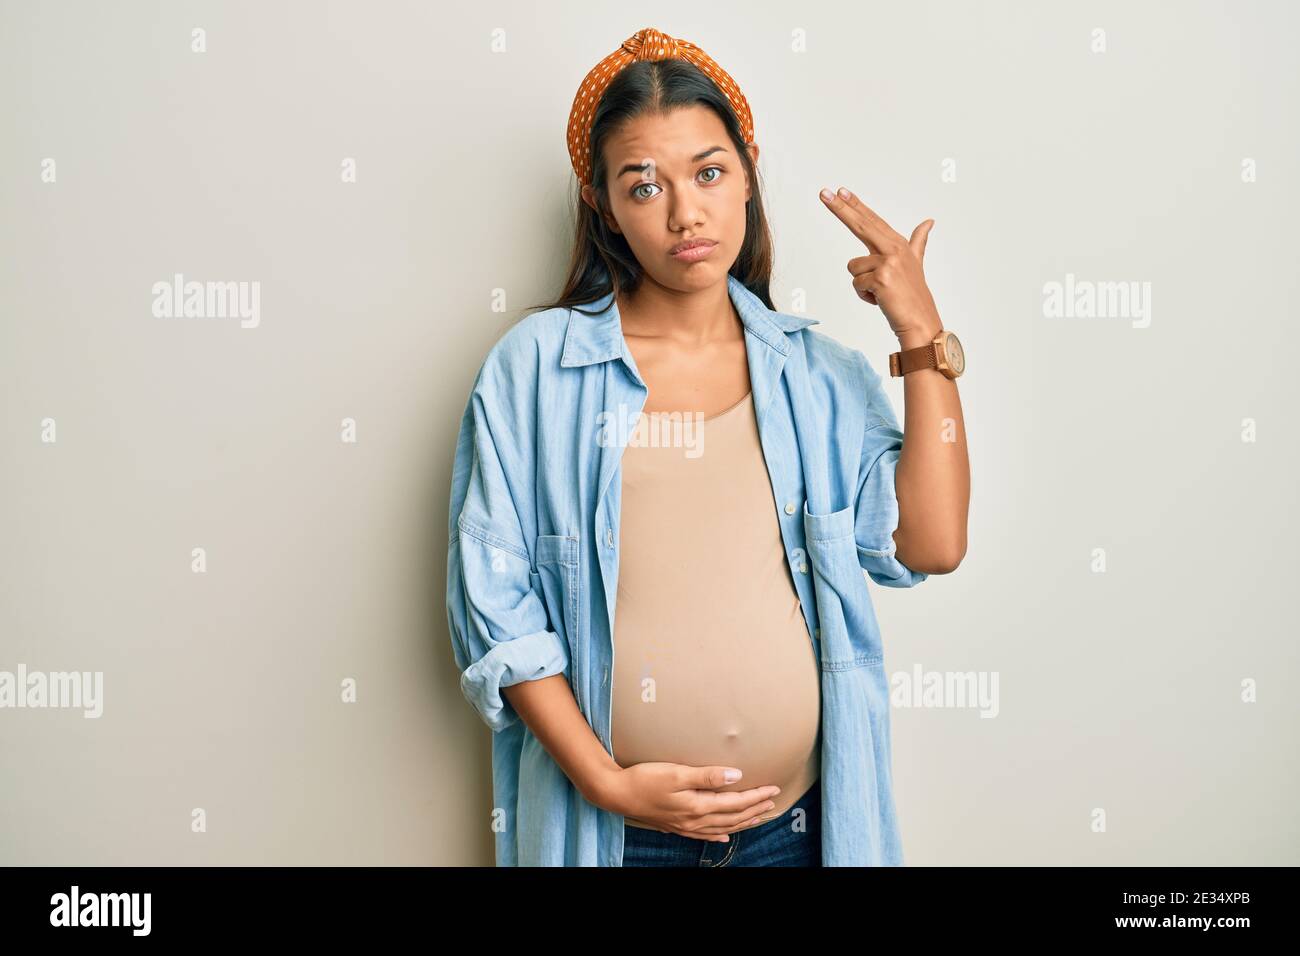 beautiful-hispanic-woman-expecting-a-baby-touching-pregnant-belly-shooting-and-killing-oneself-pointing-hand-and-fingers-to-head-like-gun-suicide-ge-2E34XPB.jpg